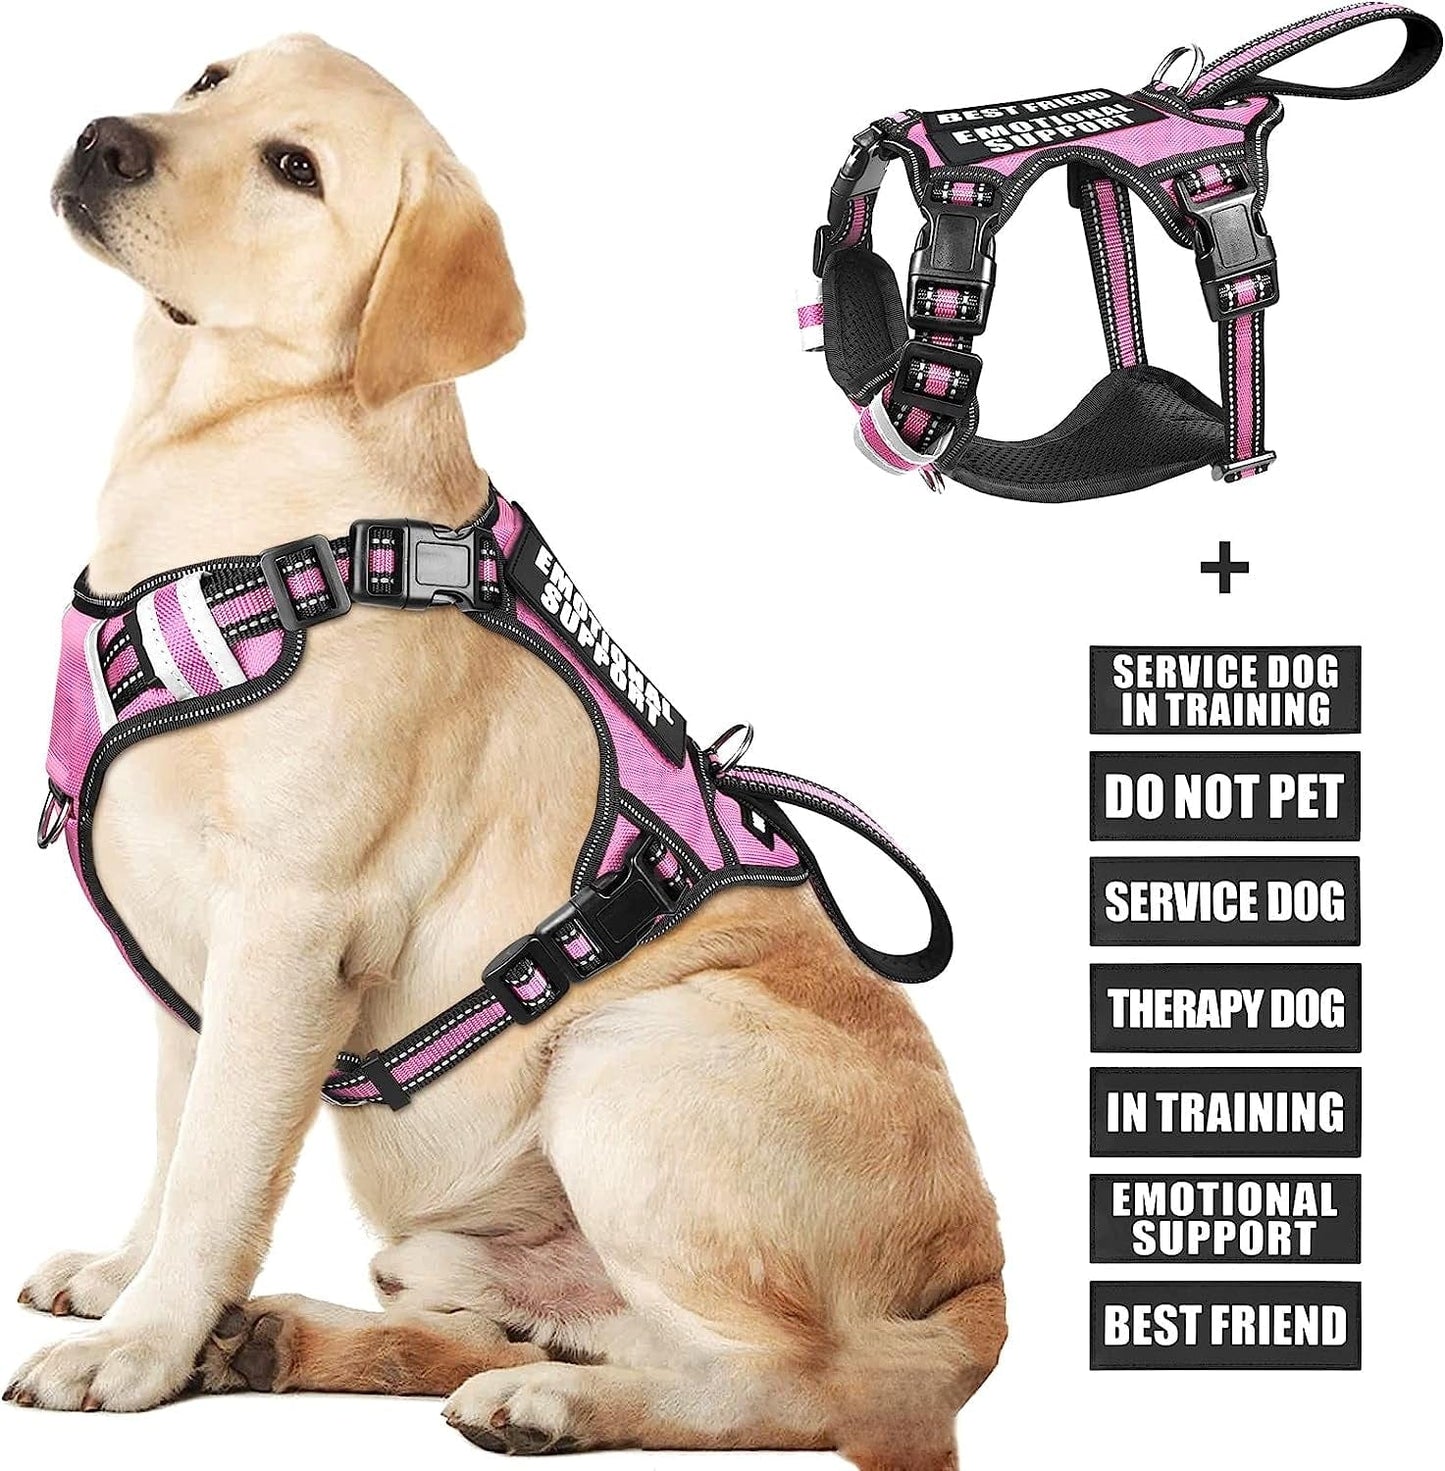 WINSEE Service Dog Vest No Pull Dog Harness with 7 Dog Patches, Reflective Pet Harness with Durable Soft Padded Handle for Training Small, Medium, Large, and Extra-Large Dogs (Large, Red)